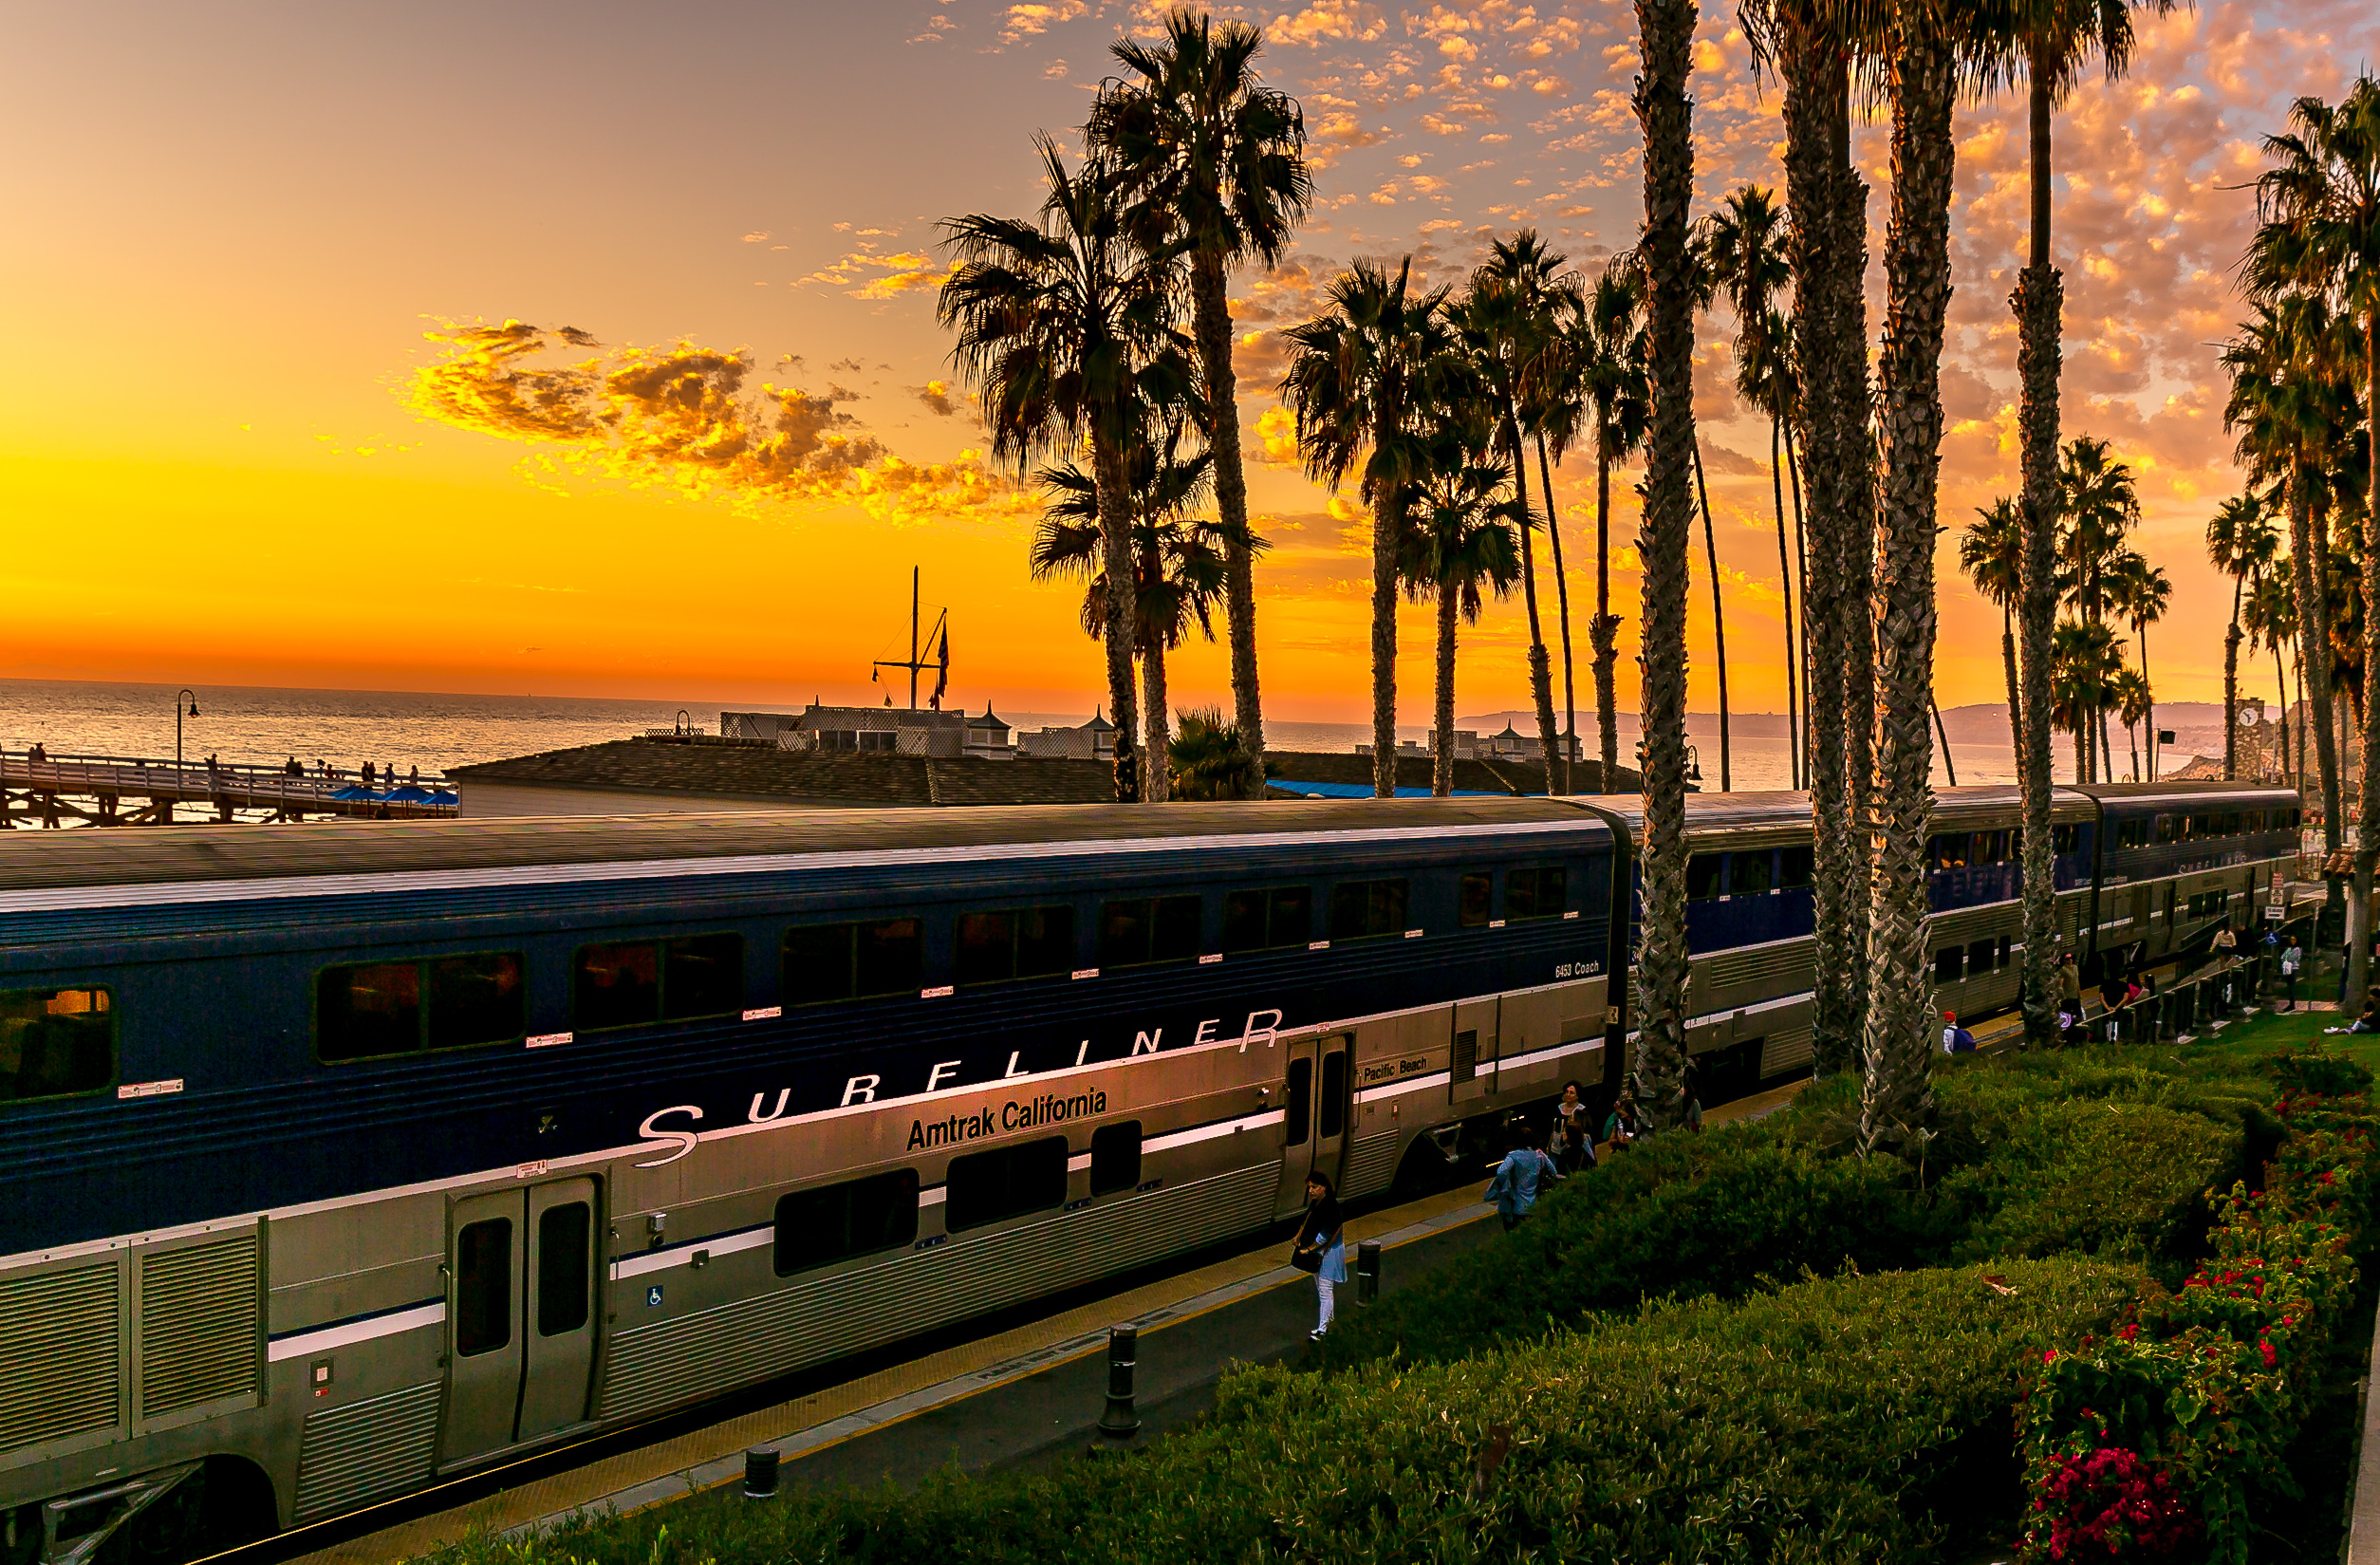 Pacific Surfliner (flickr.com, Cameron Photo, CC BY-ND 2.0 Generic)